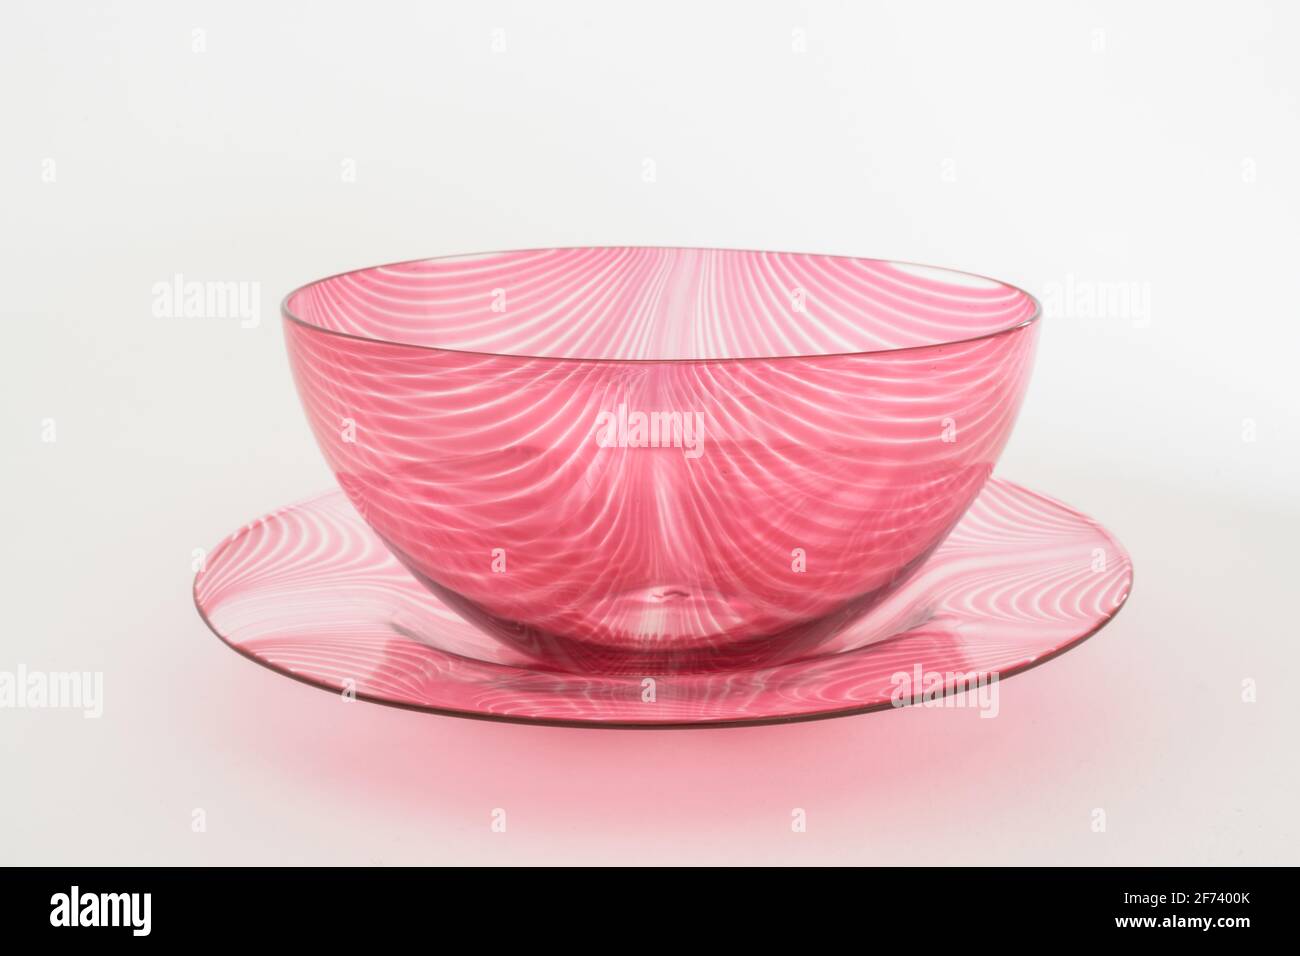 Harry Powell Ruby Melted Pulled Up Threaded Finger Bowl and Plate c.1890 Early Whitefriars Glass. Arts and Crafts. London, UK Stock Photo